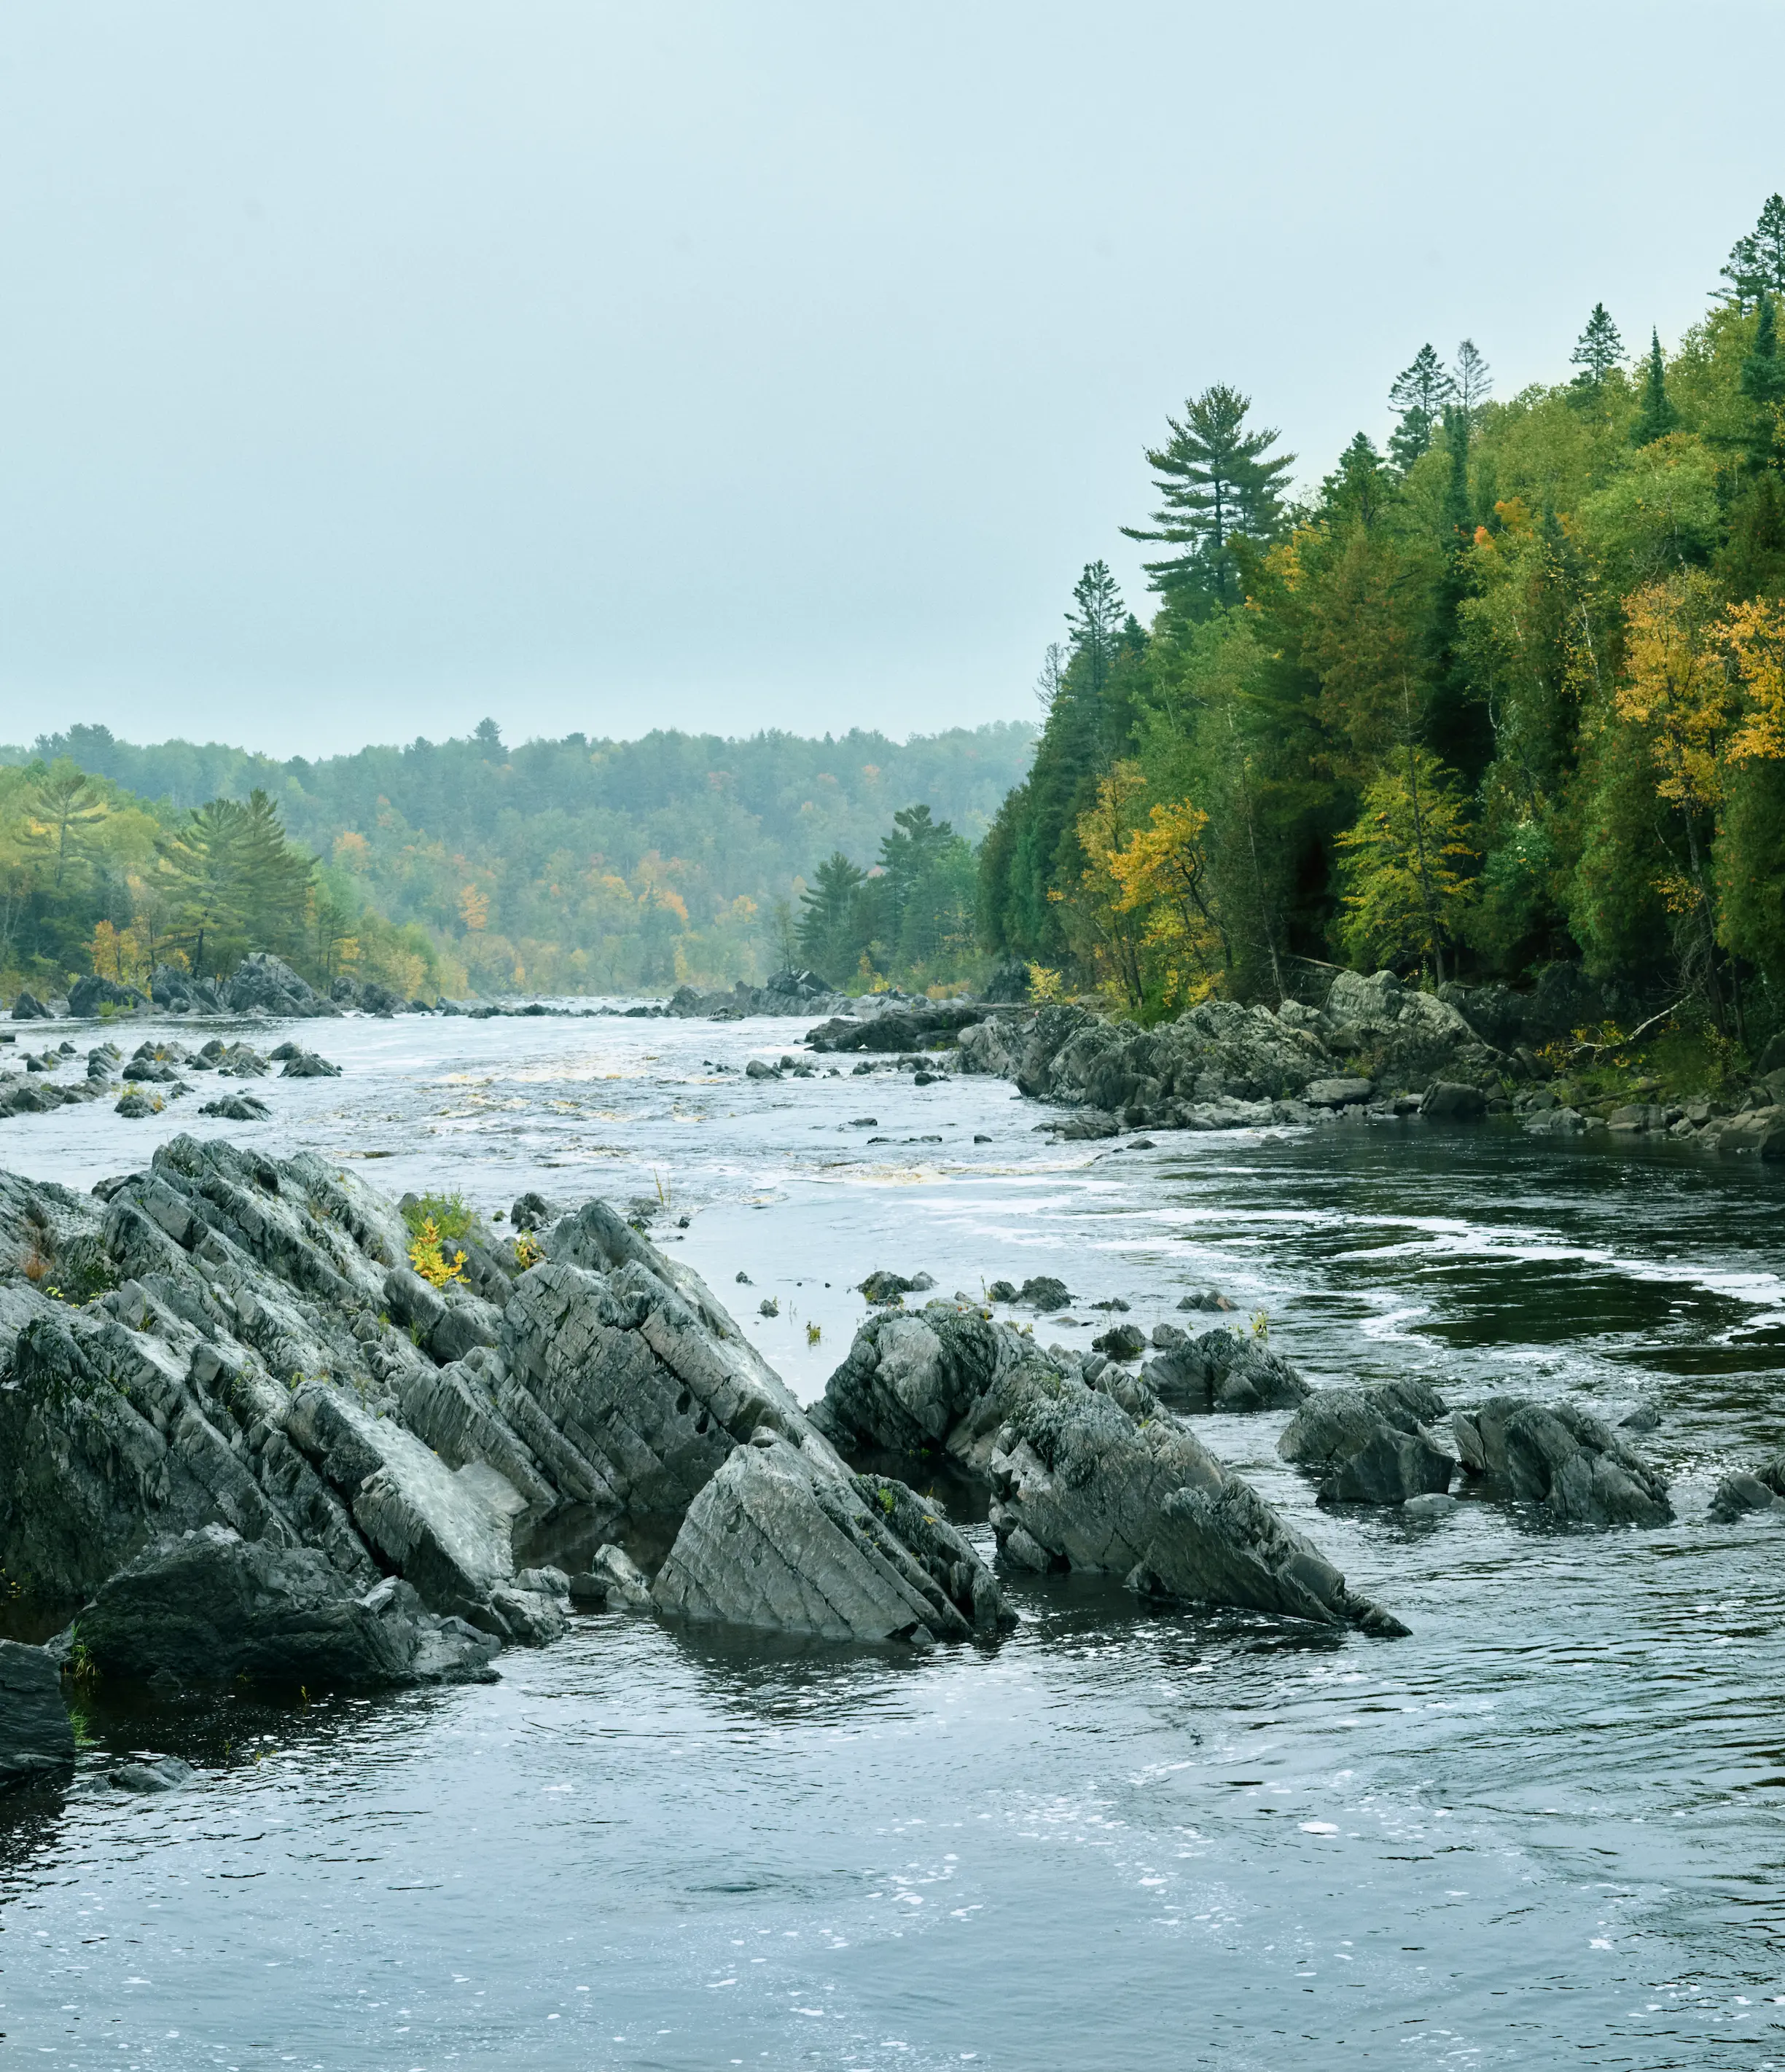 Green and blue tones highlight the water of the river and the angled, sharp edges of the rock formations. On the right, tall conifers stretch into the cloudy sky.